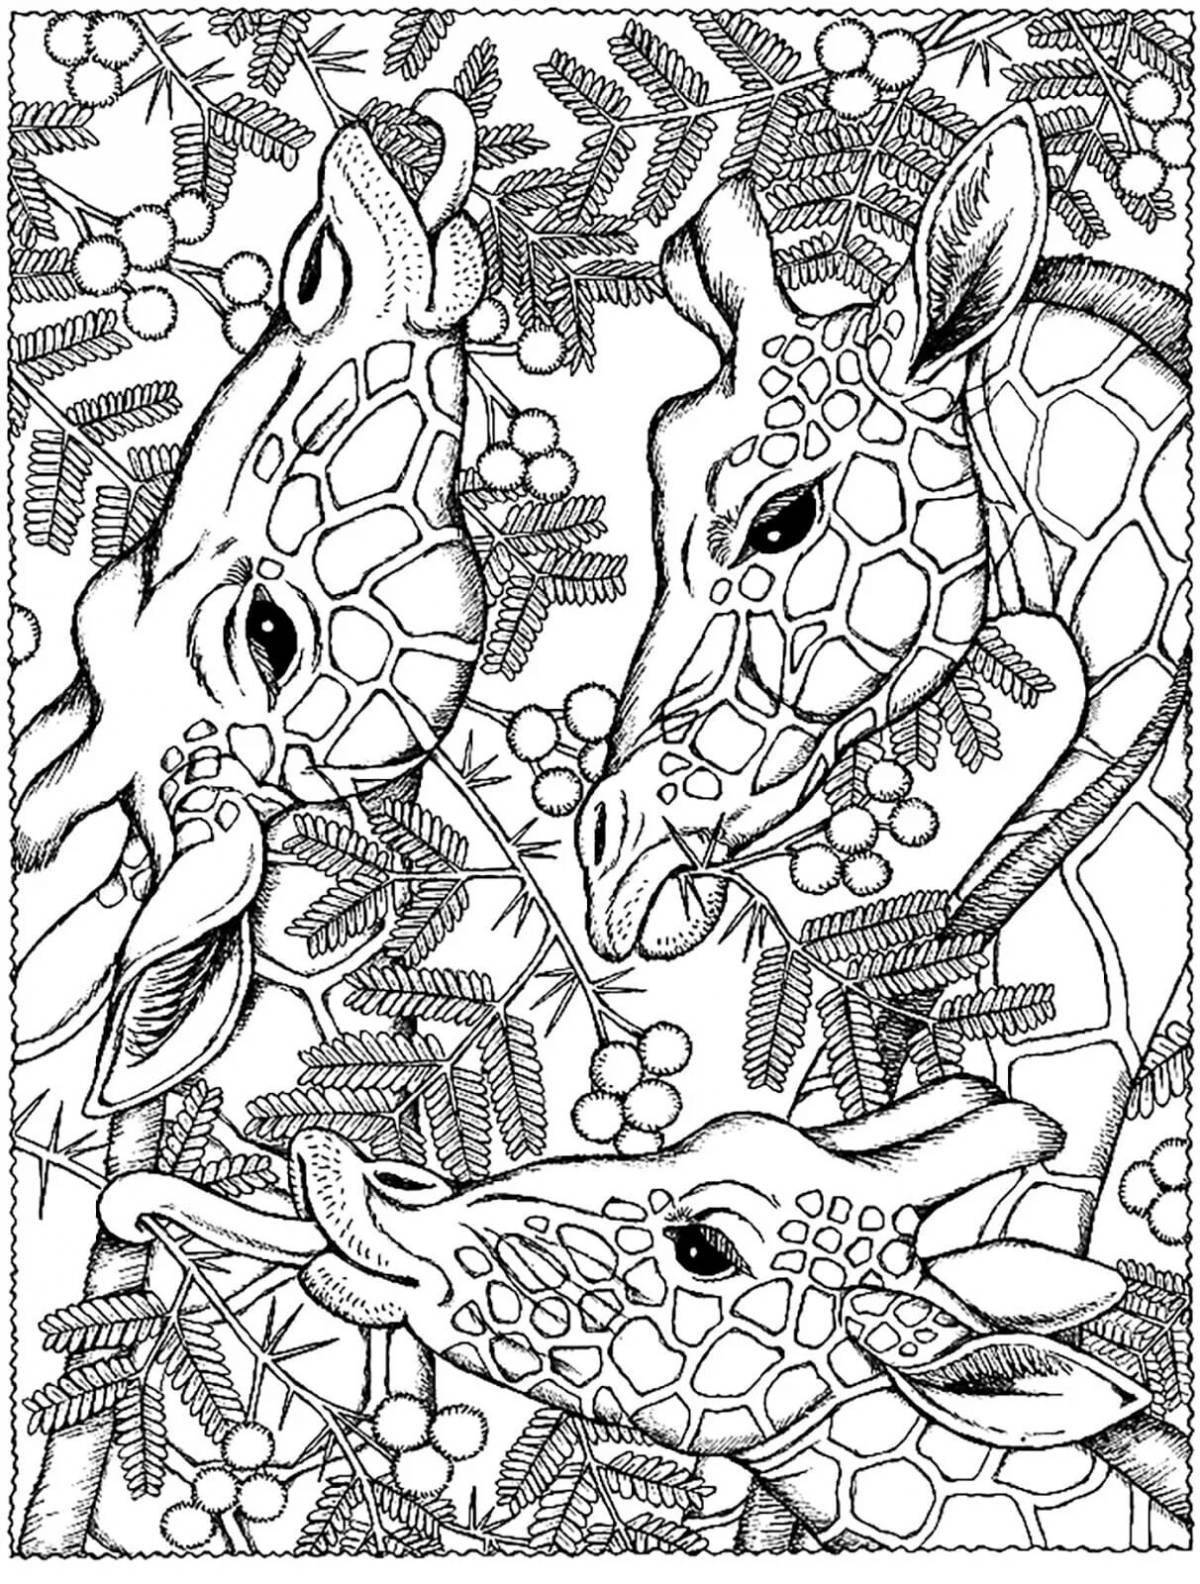 Invigorating coloring book, best for adults